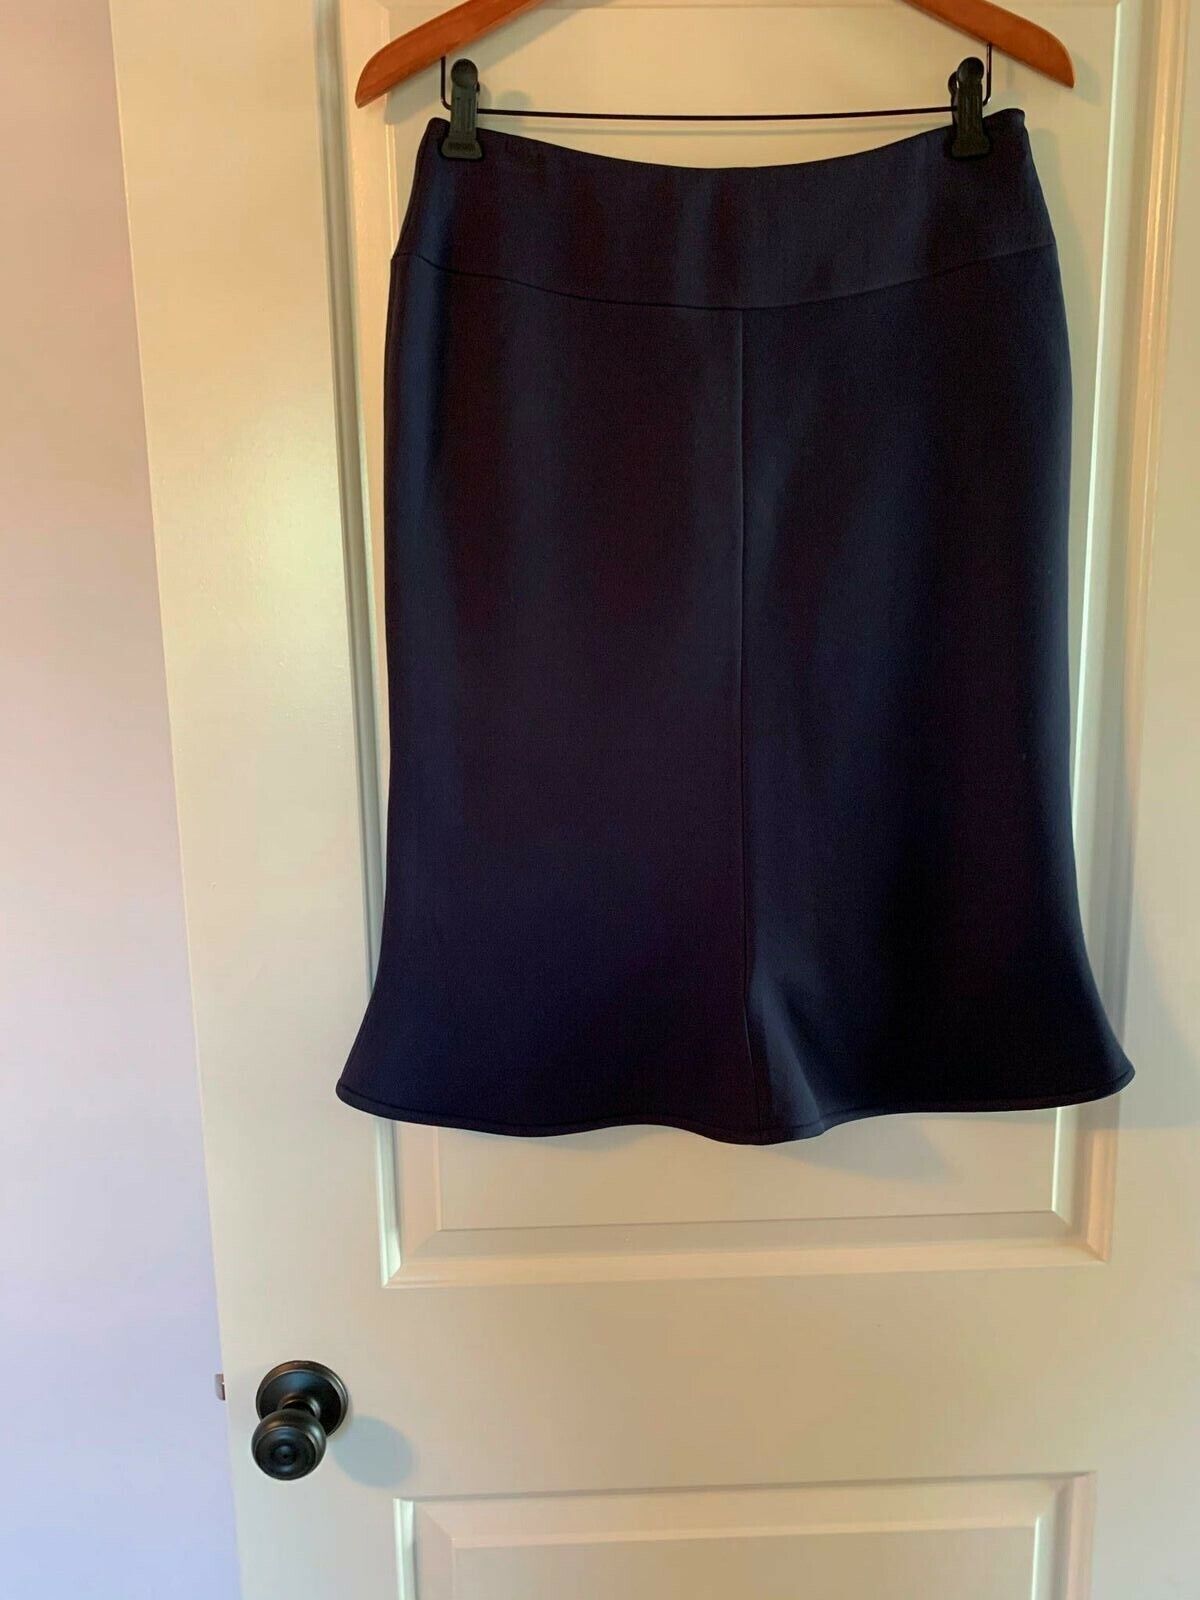 Primary image for NWT GIORGIO ARMANI Cotton Blend Navy Blue Trumpet Skirt SZ IT 46/US 12